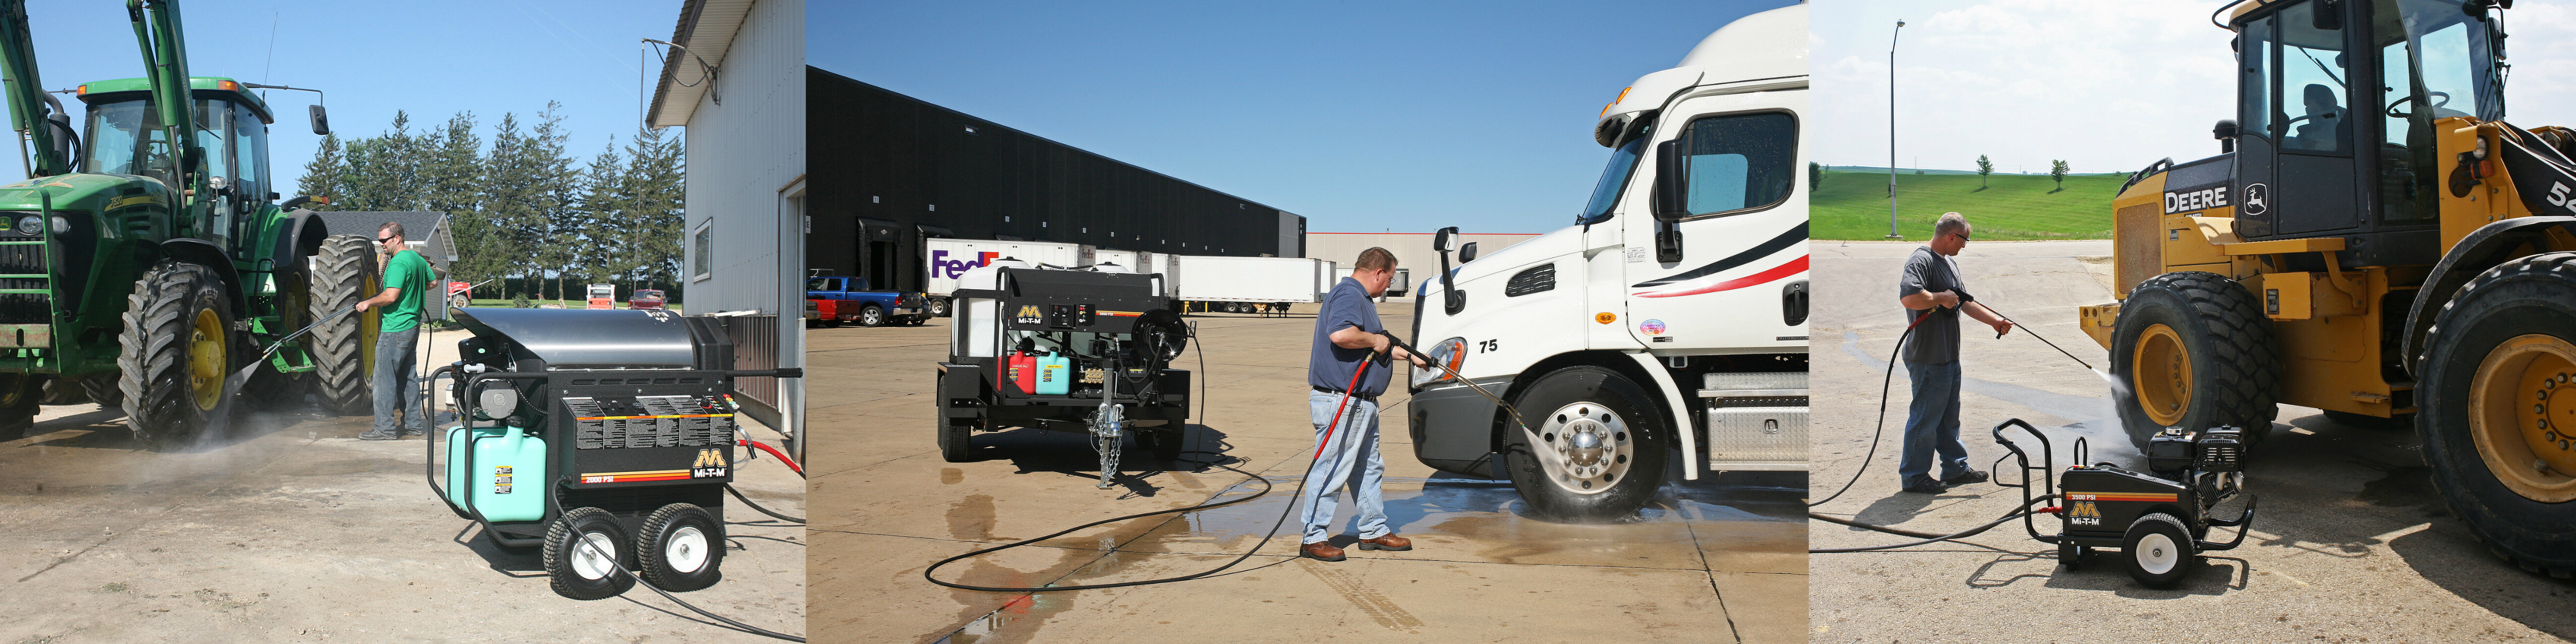 Pressure Washers Ag-Trucking-Construction